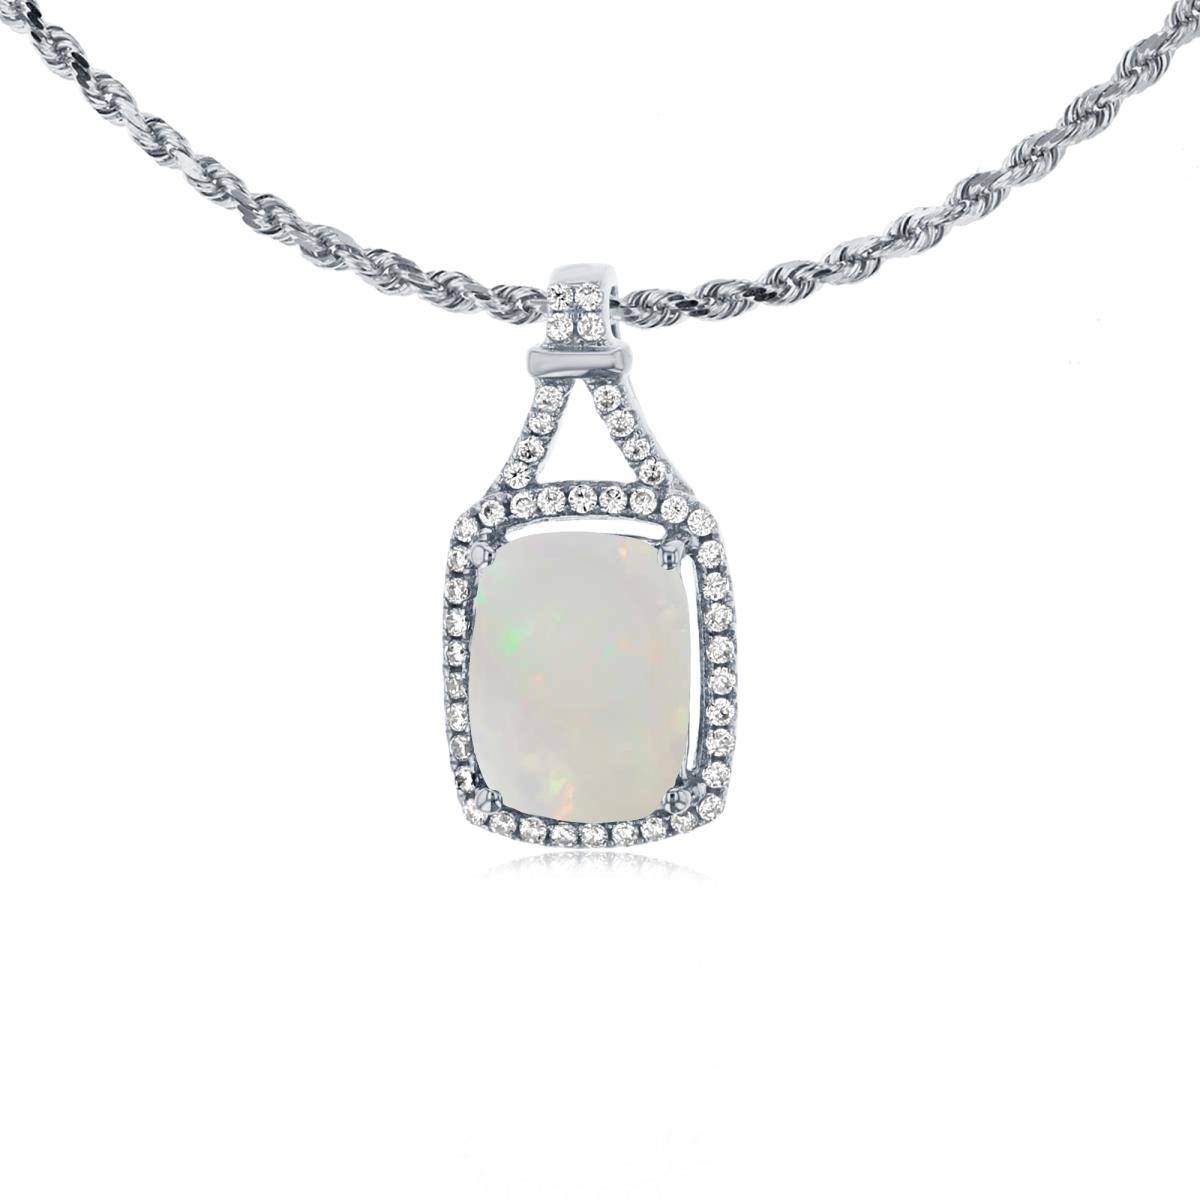 10K White Gold 8x6mm Cushion Opal & 0.13 CTTW Rd Diamonds Halo 18" Rope Chain Necklace